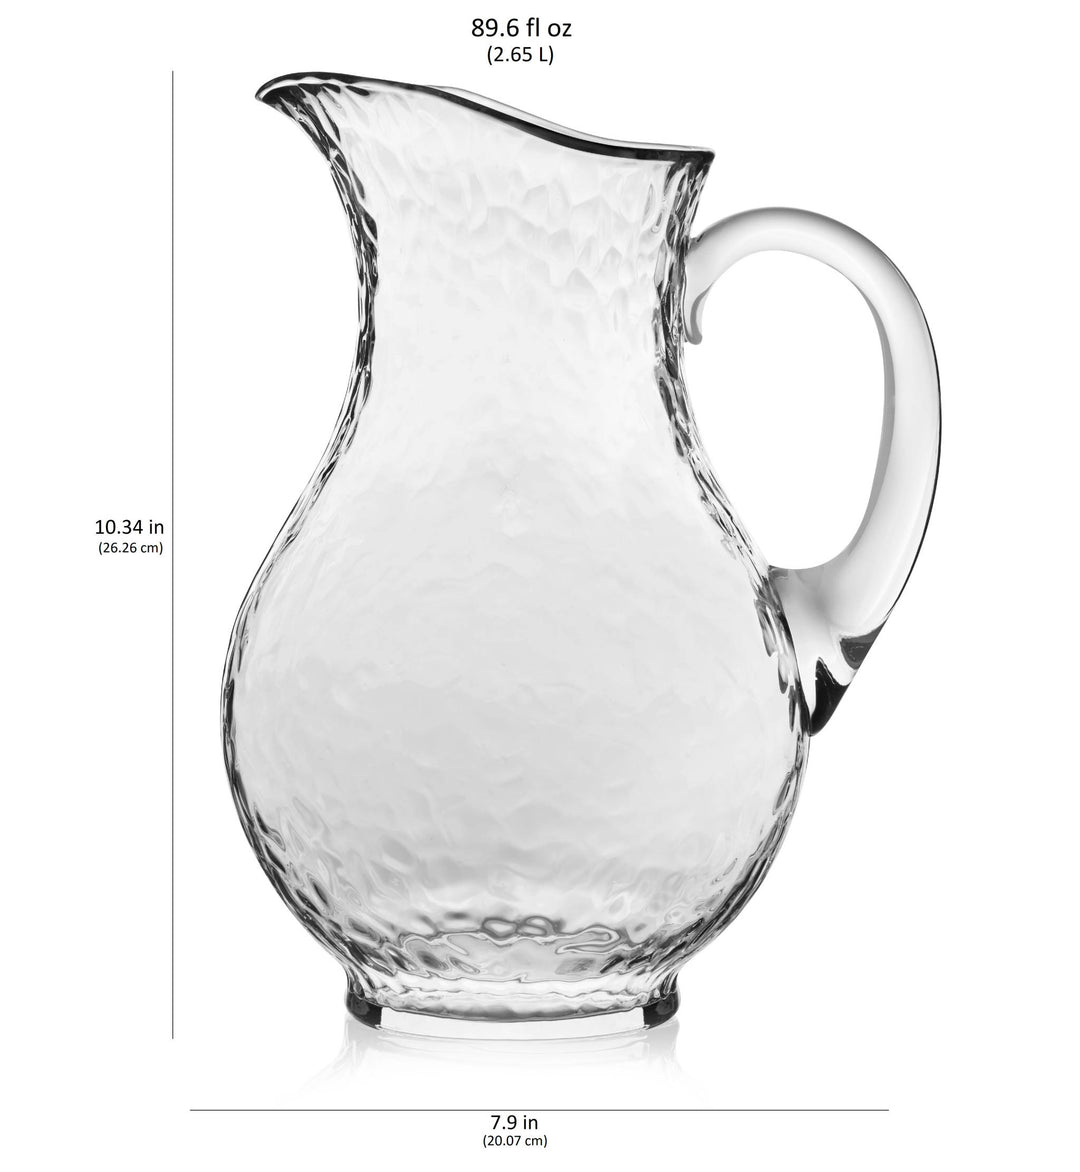 Includes 1, 86.9-ounce glass pitcher (7.9-inch diameter x 10.34-inch height); due to the glass-making process for this item you may notice a seam in the glass, this is typical and does not affect quality